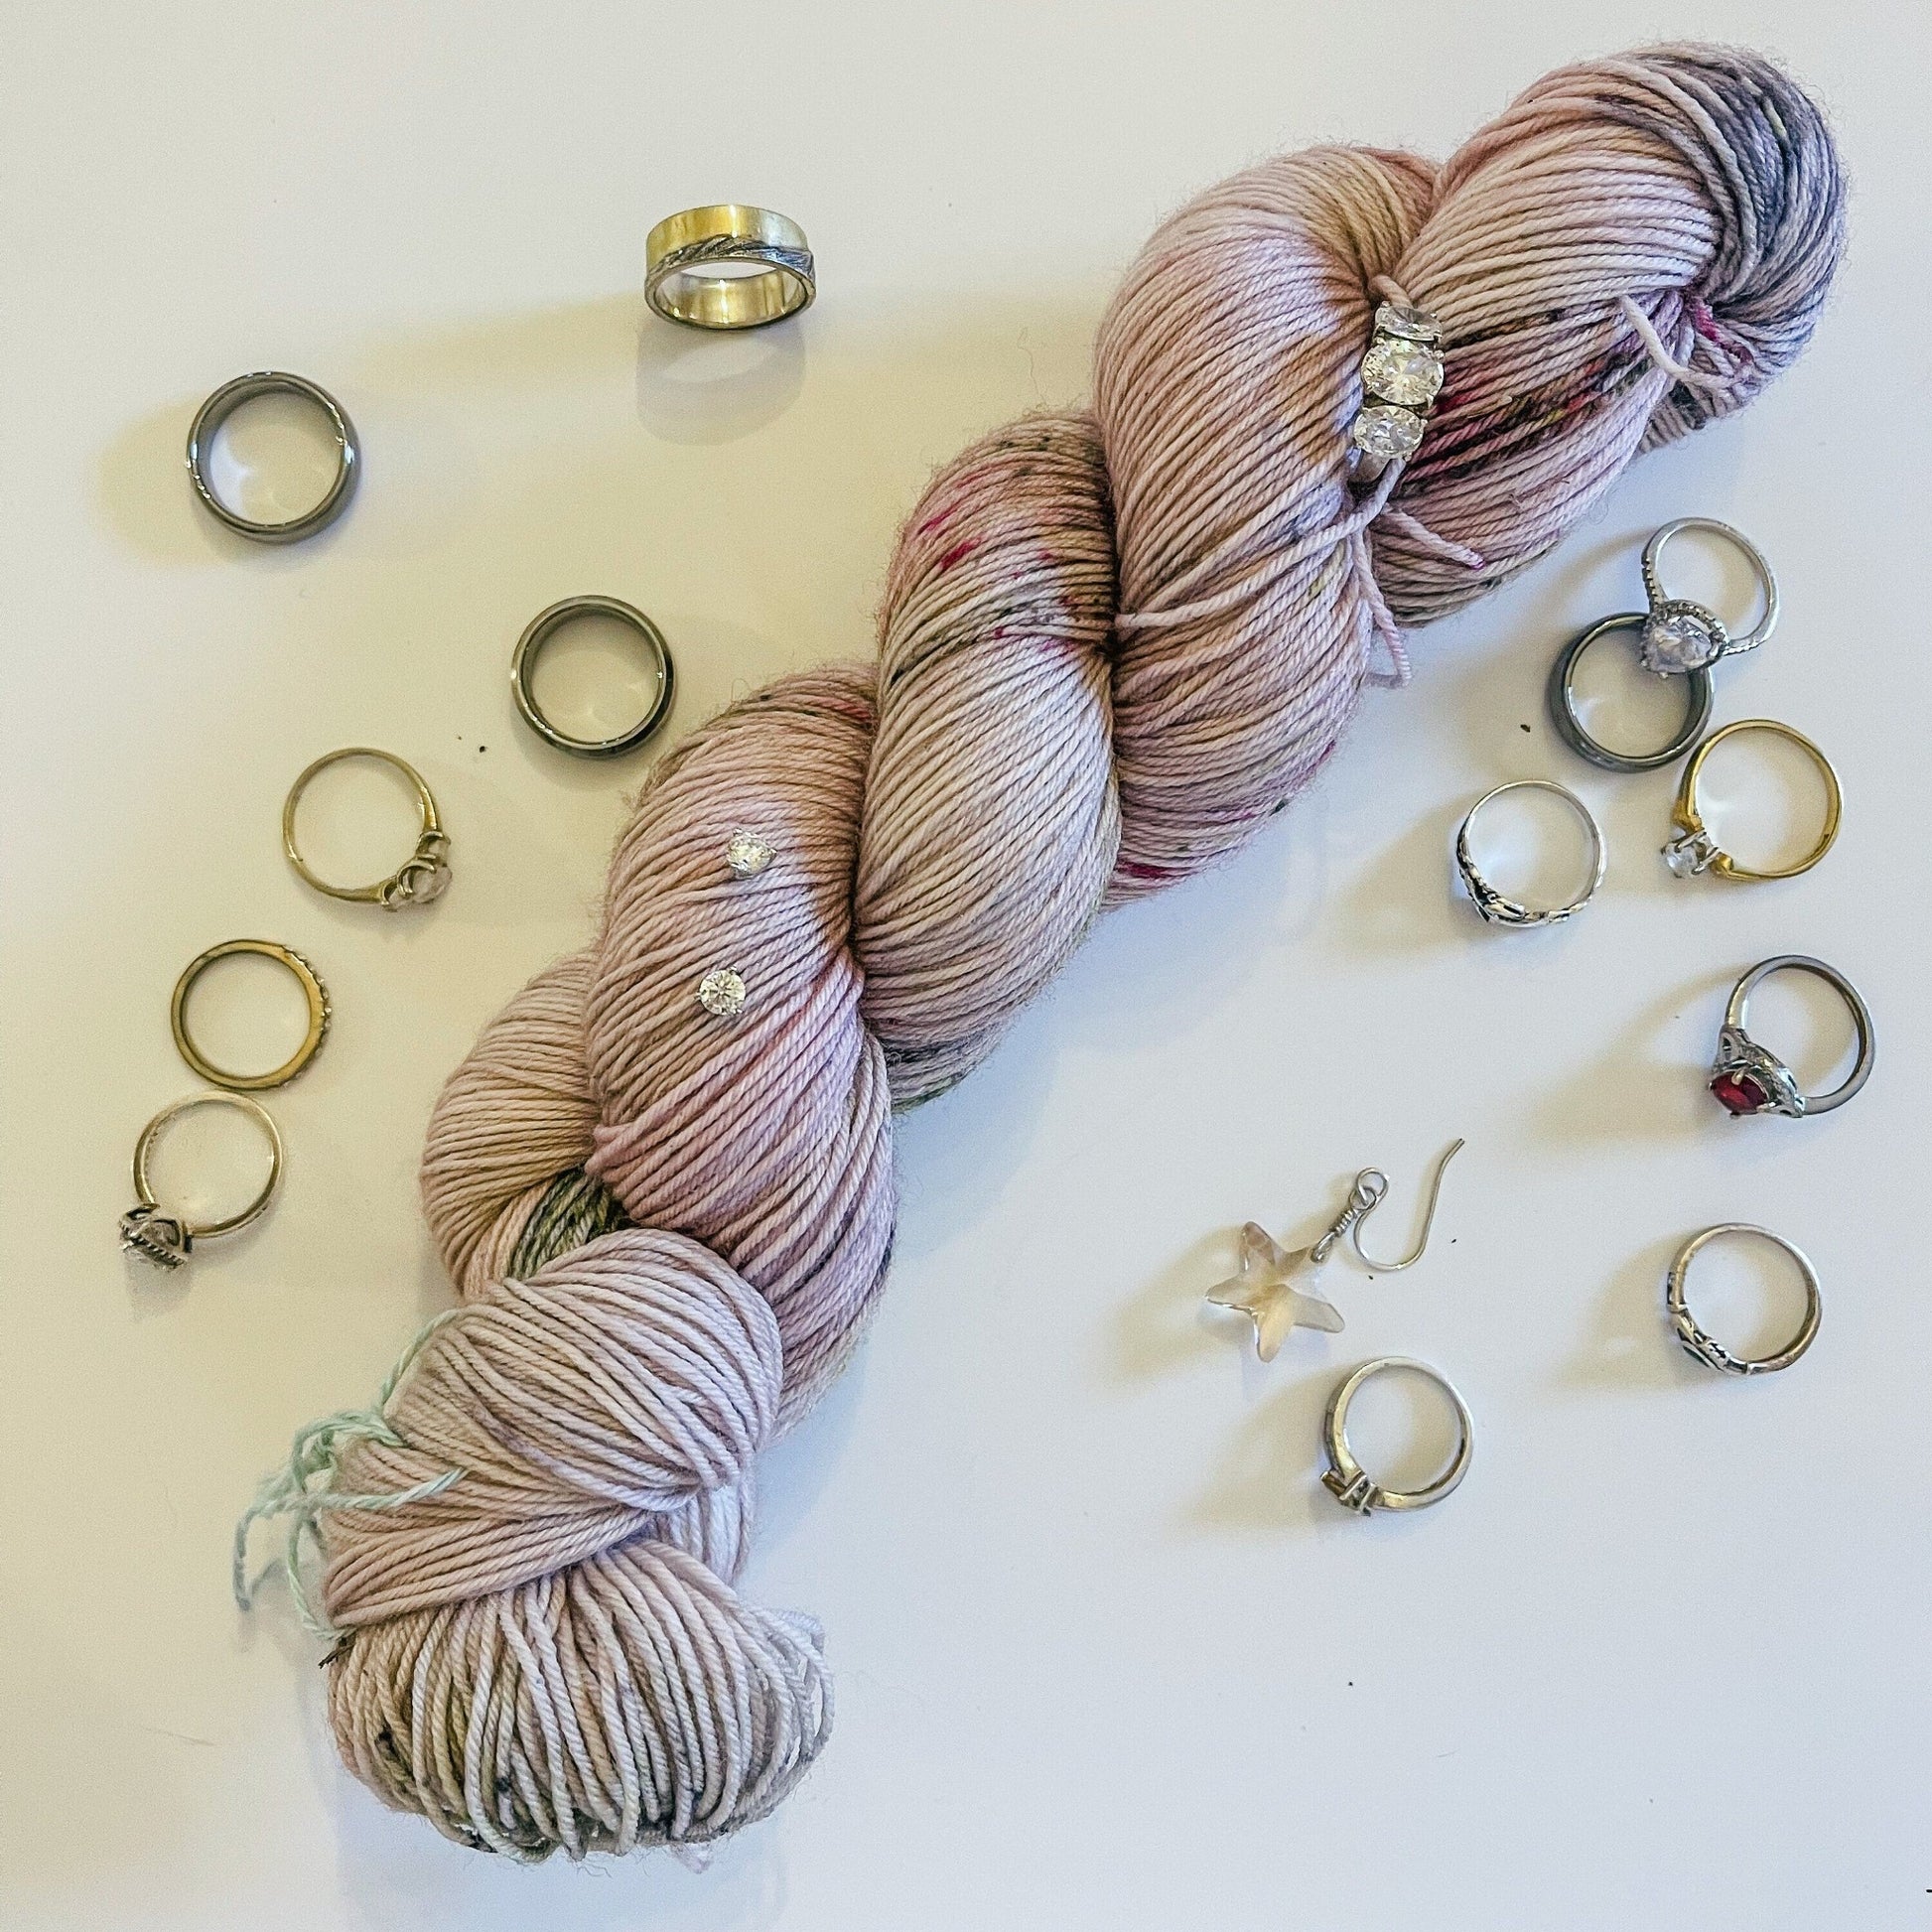 A skein of Truffle Shuffle hand-dyed yarn surrounded by jewelry, mostly rings.